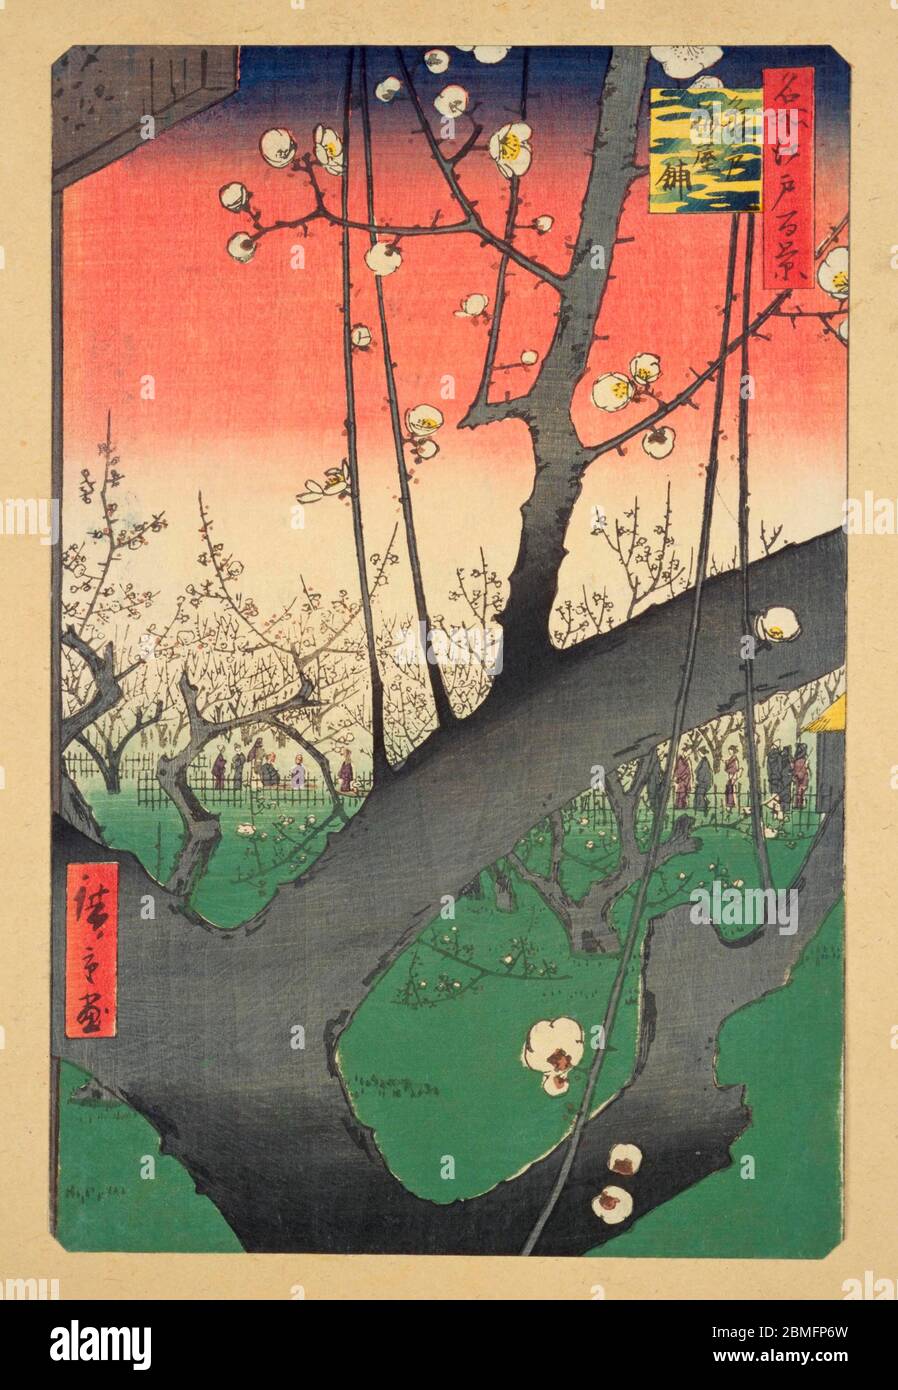 [ 1850s Japan - Japanese Plum Blossom ] —   Plum blossom at Umeyashiki, a plum garden by the banks of the Sumidagawa River in Kameido, Edo (current Tokyo),1857 (Ansei 4).  This is one of the Hiroshige prints that Dutch painter Vincent Van Gogh (1853–1890) painted copies of to study the elements that he admired in Japanese woodblock prints.  This woodblock print is image 30 in One Hundred Famous Views of Edo (名所江戸百景, Meisho Edo Hyakkei), a series created by ukiyoe artist Utagawa Hiroshige (歌川広重, 1797–1858).  It is one of 42 spring scenes in the series.  Title: Plum Park in Kameido (亀戸梅屋舗, Kamei Stock Photo